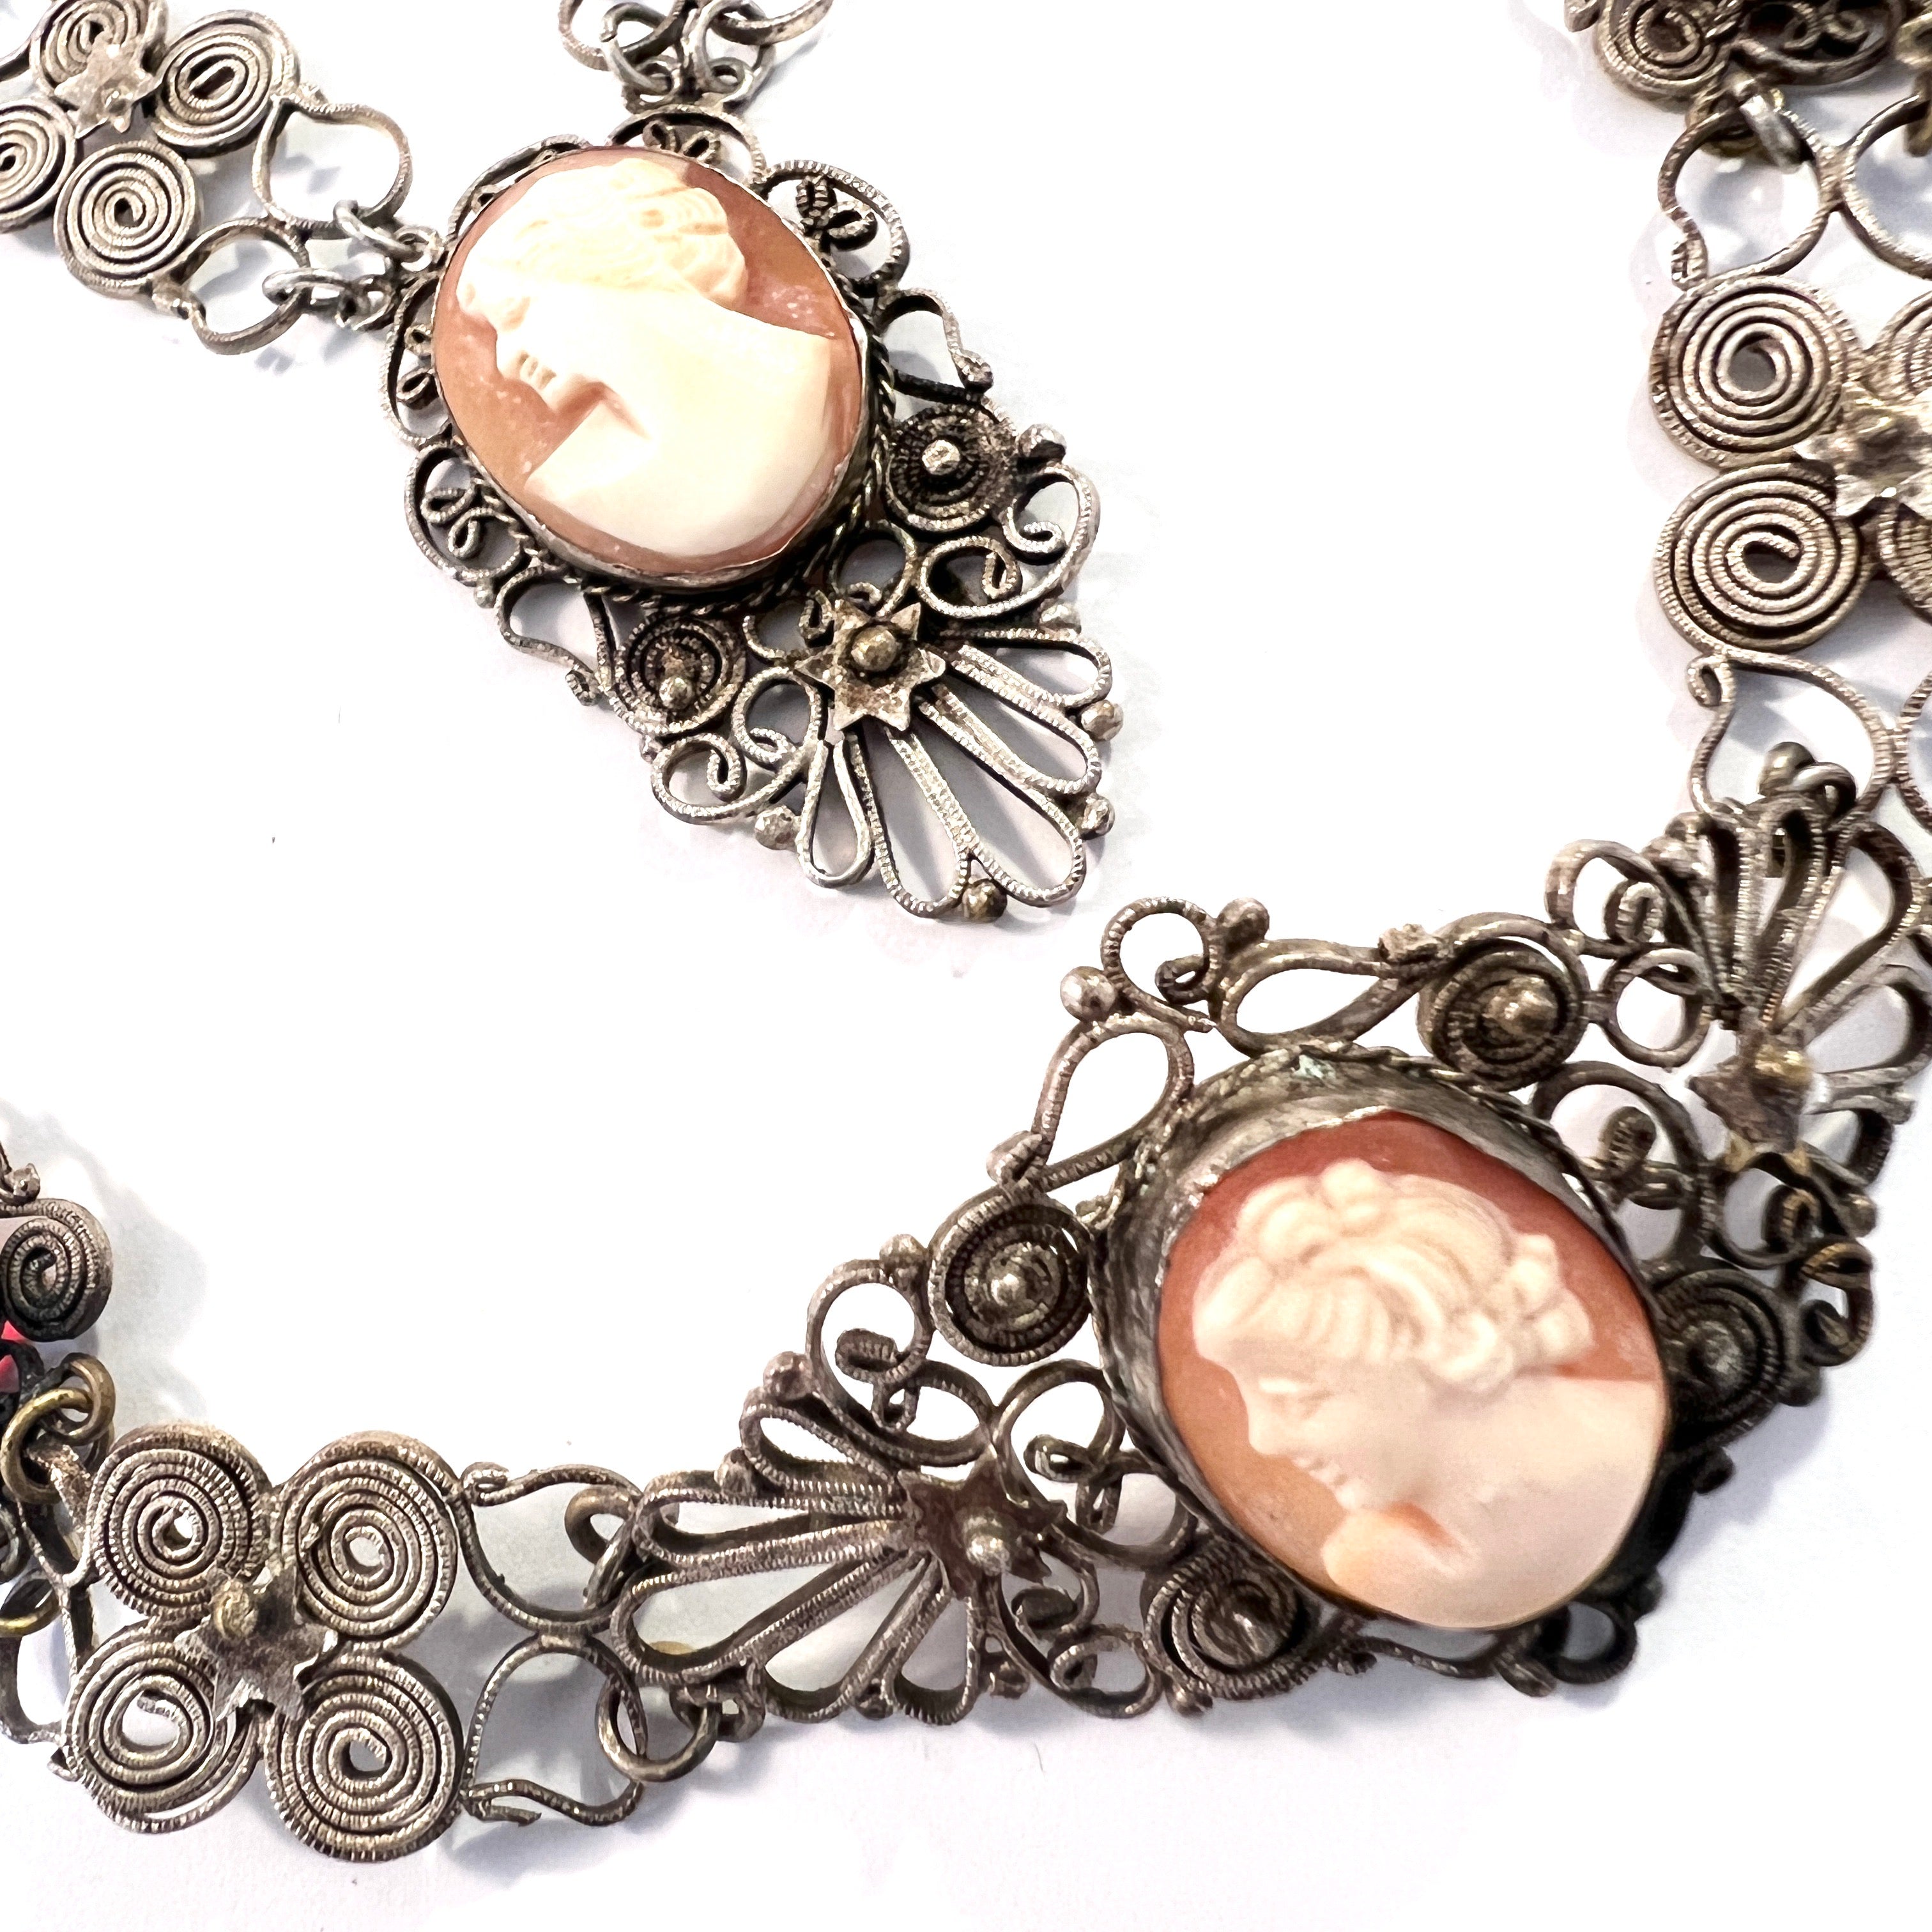 Italy Early 1900s Silver Plated 800 Silver Cameo Paste Necklace and Bracelet.